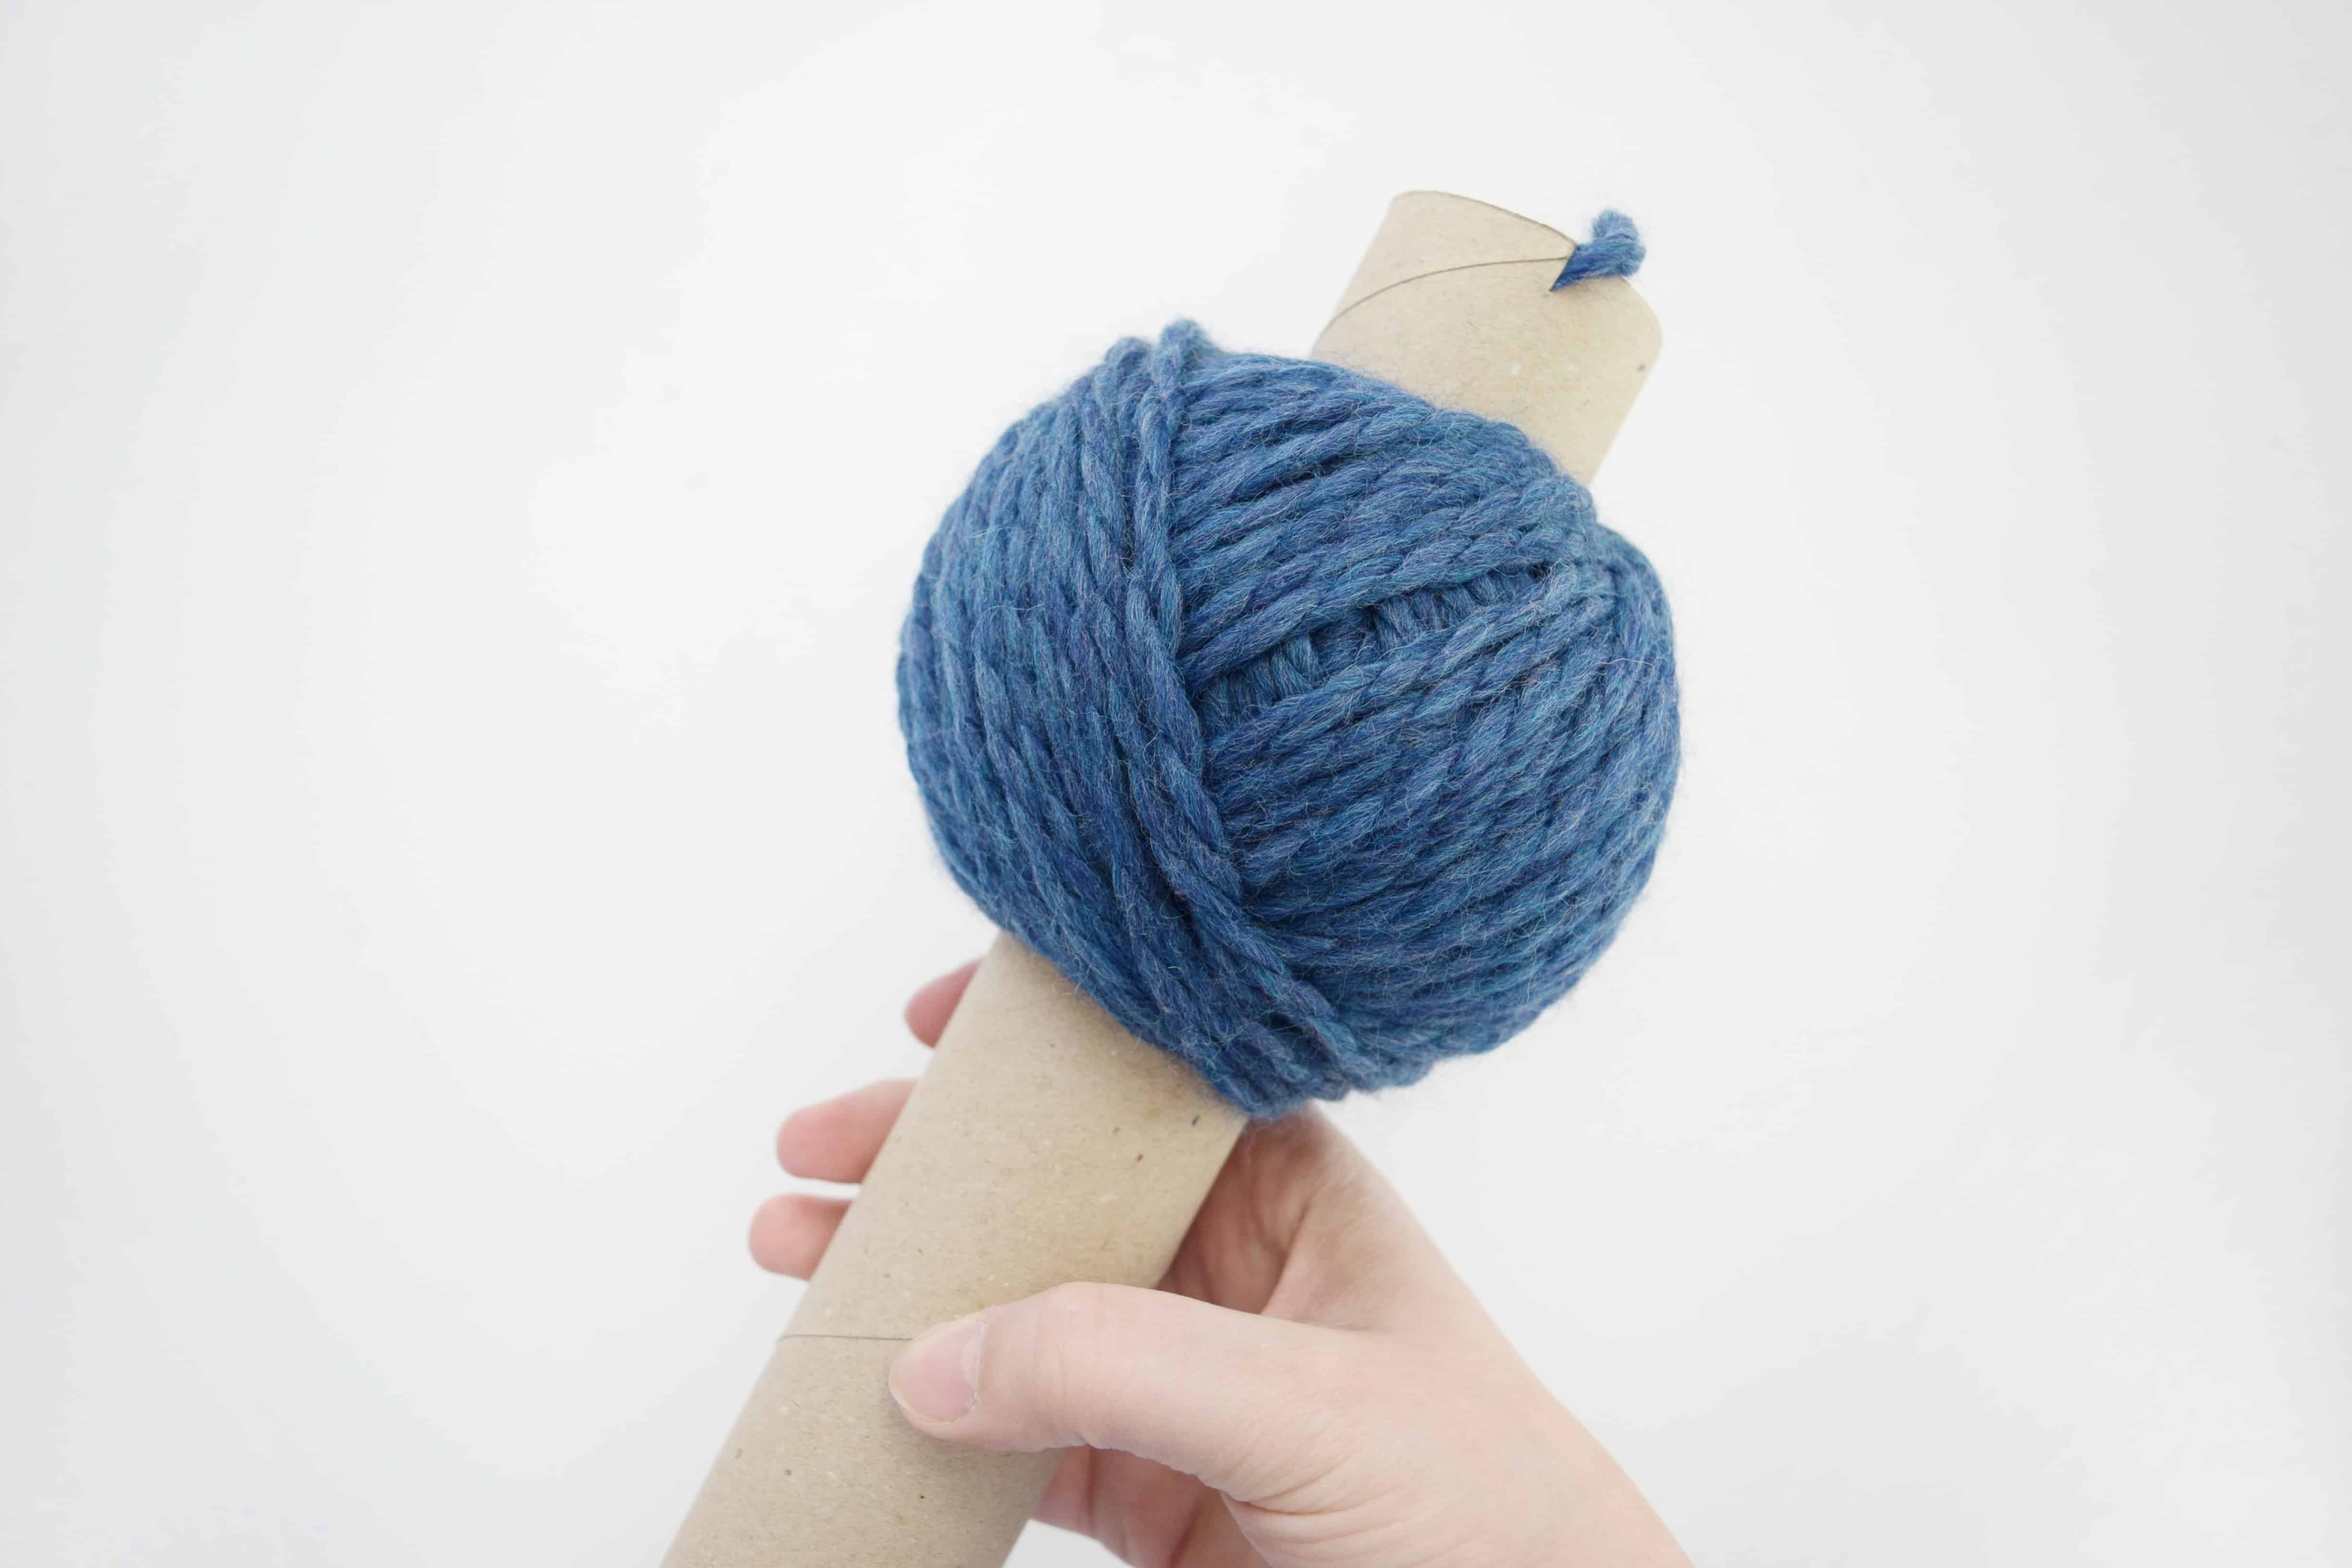 How to Wind a Skein of Yarn